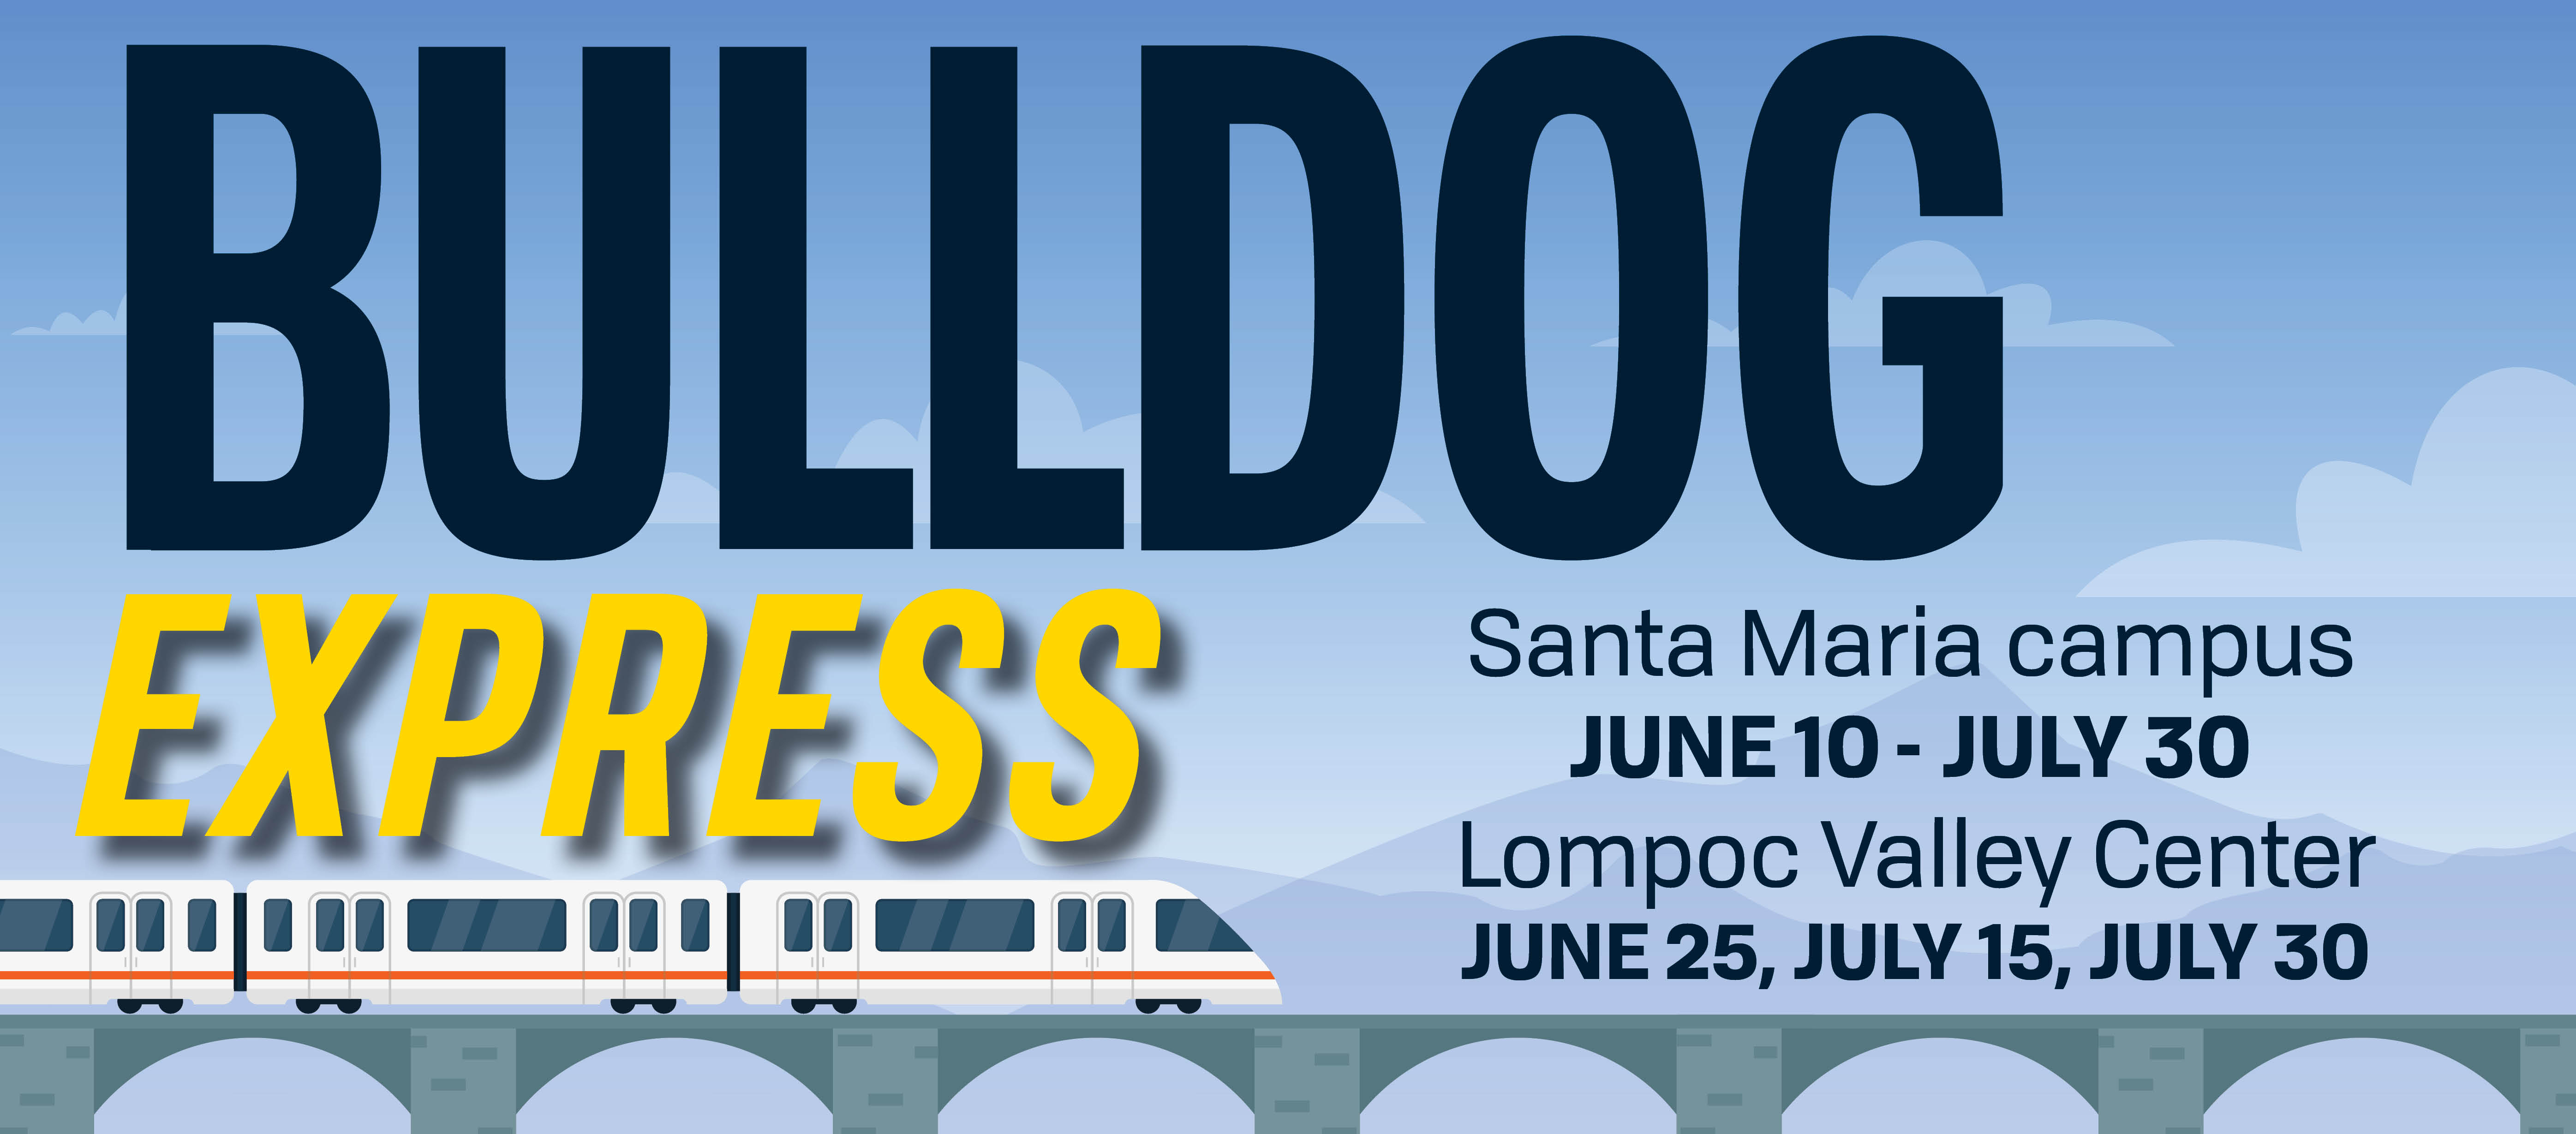 Bulldog Express in big letters with a train traveling below. 